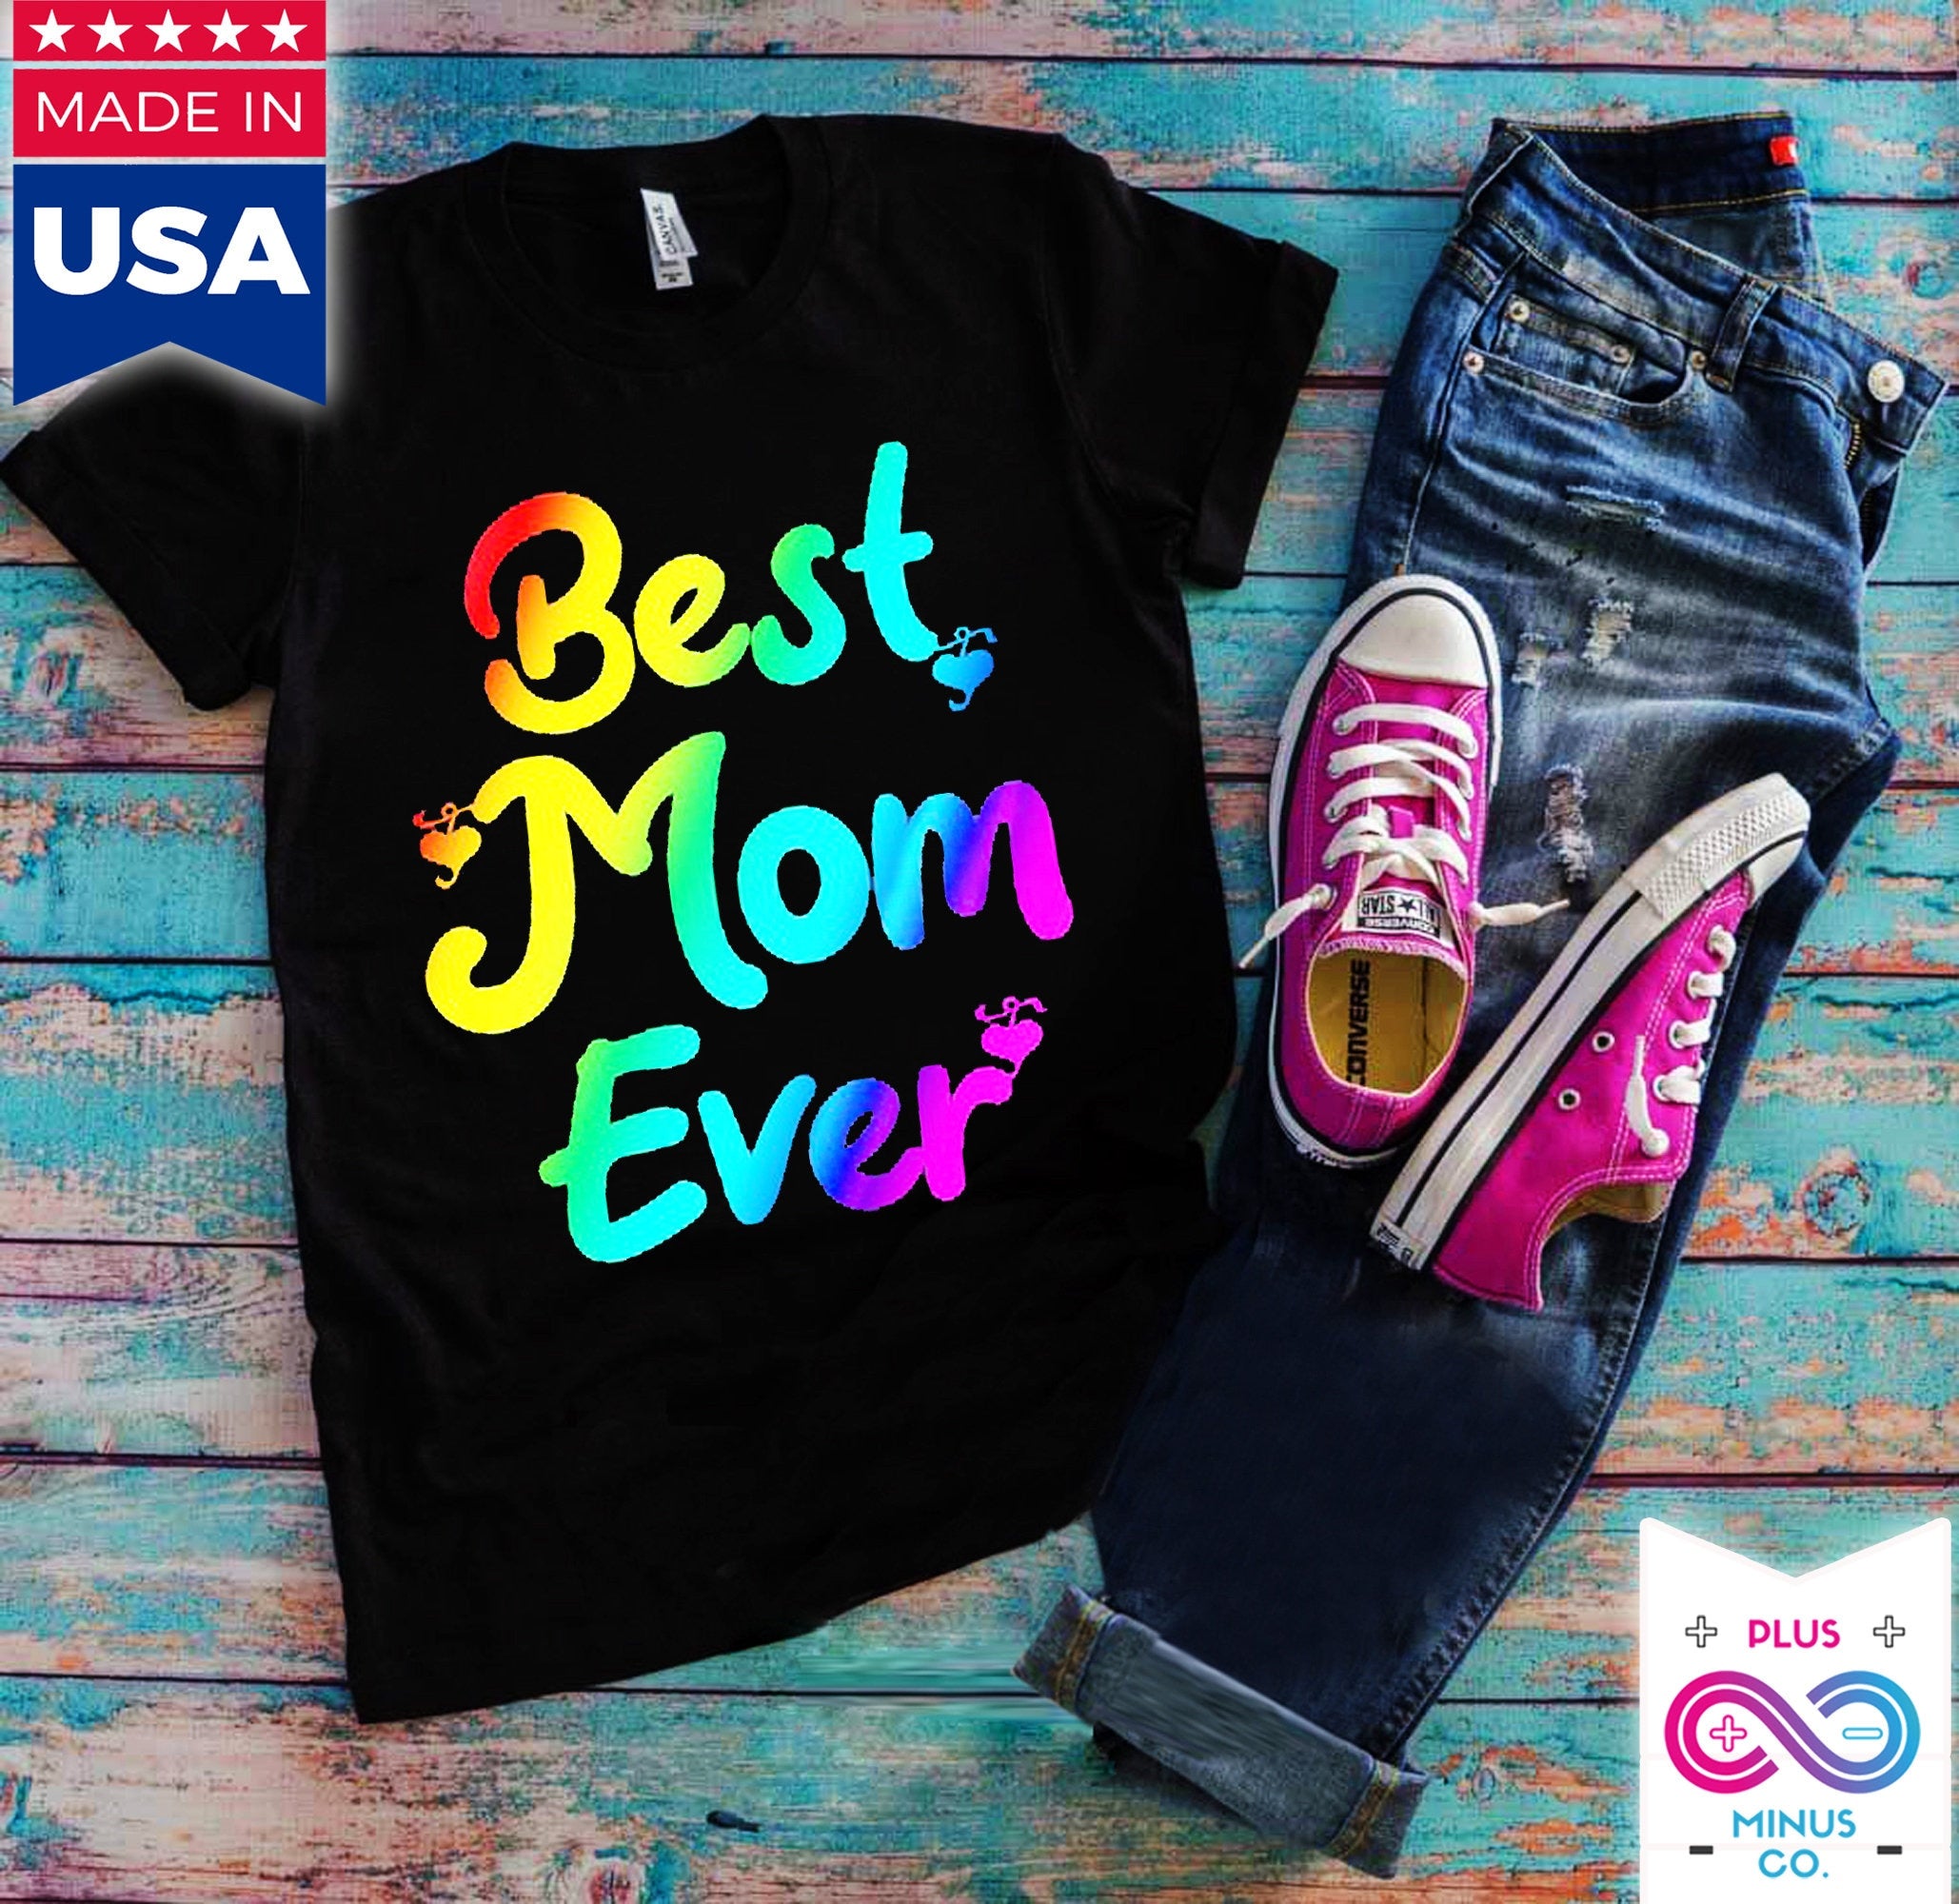 Best Mom Ever | Multi-Color T-Shirts,Mothers Day Gift, Mothers Day Shirt, Gift For Mom, Mom Birthday Gift - plusminusco.com